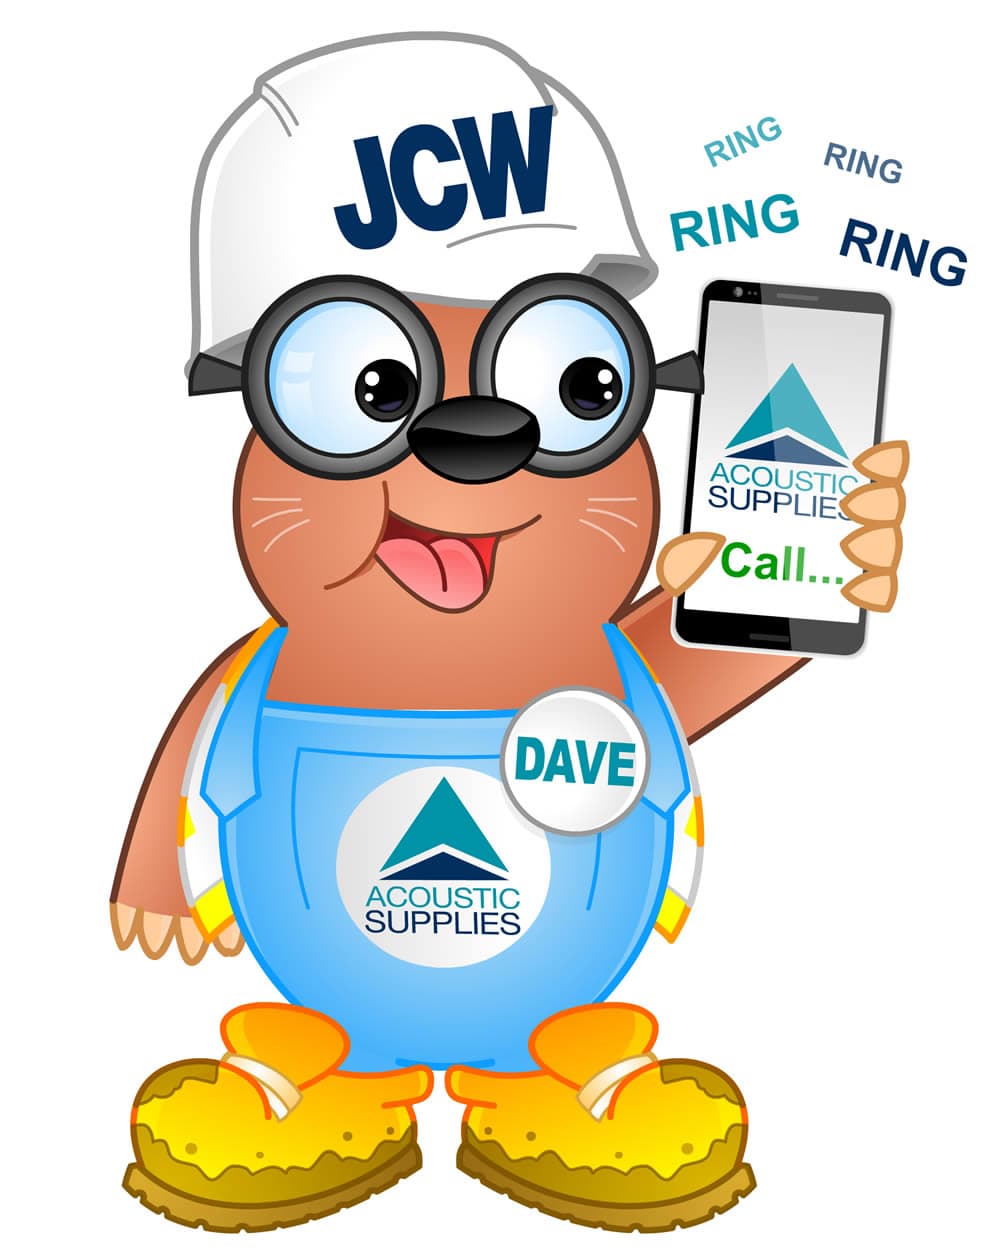 DAVE - JCW Acoustic Supplies